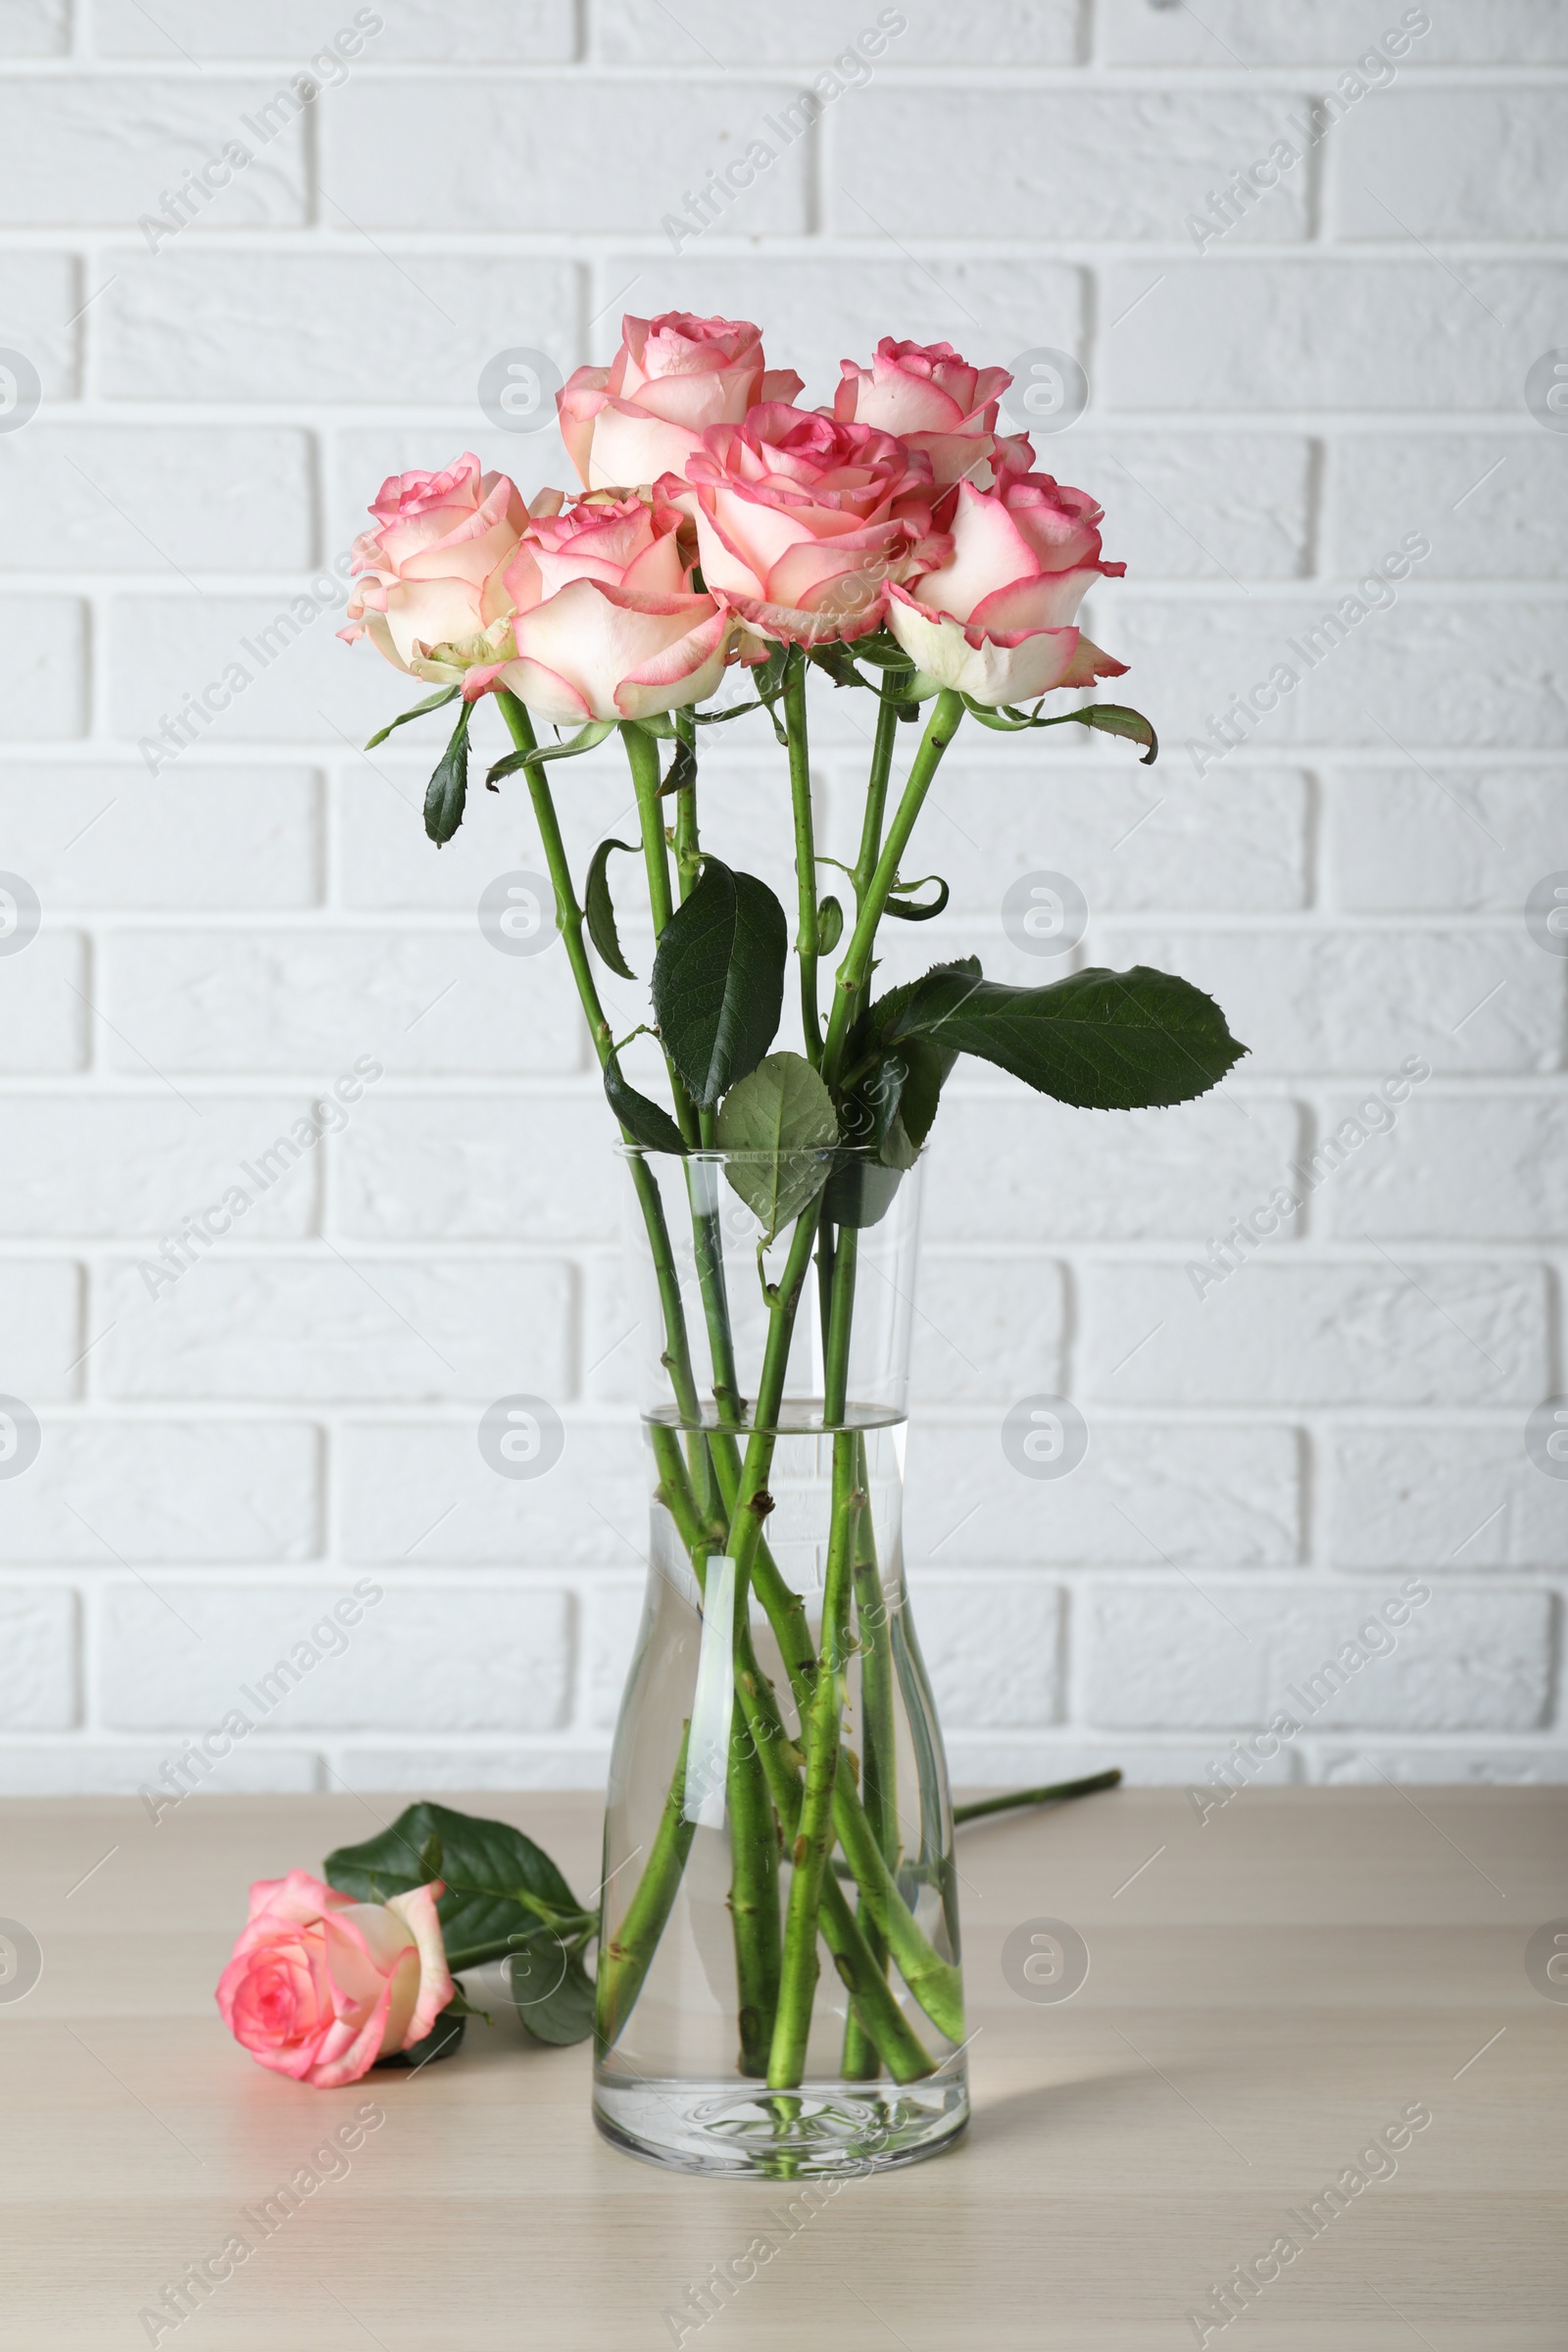 Photo of Vase with beautiful pink roses on wooden table